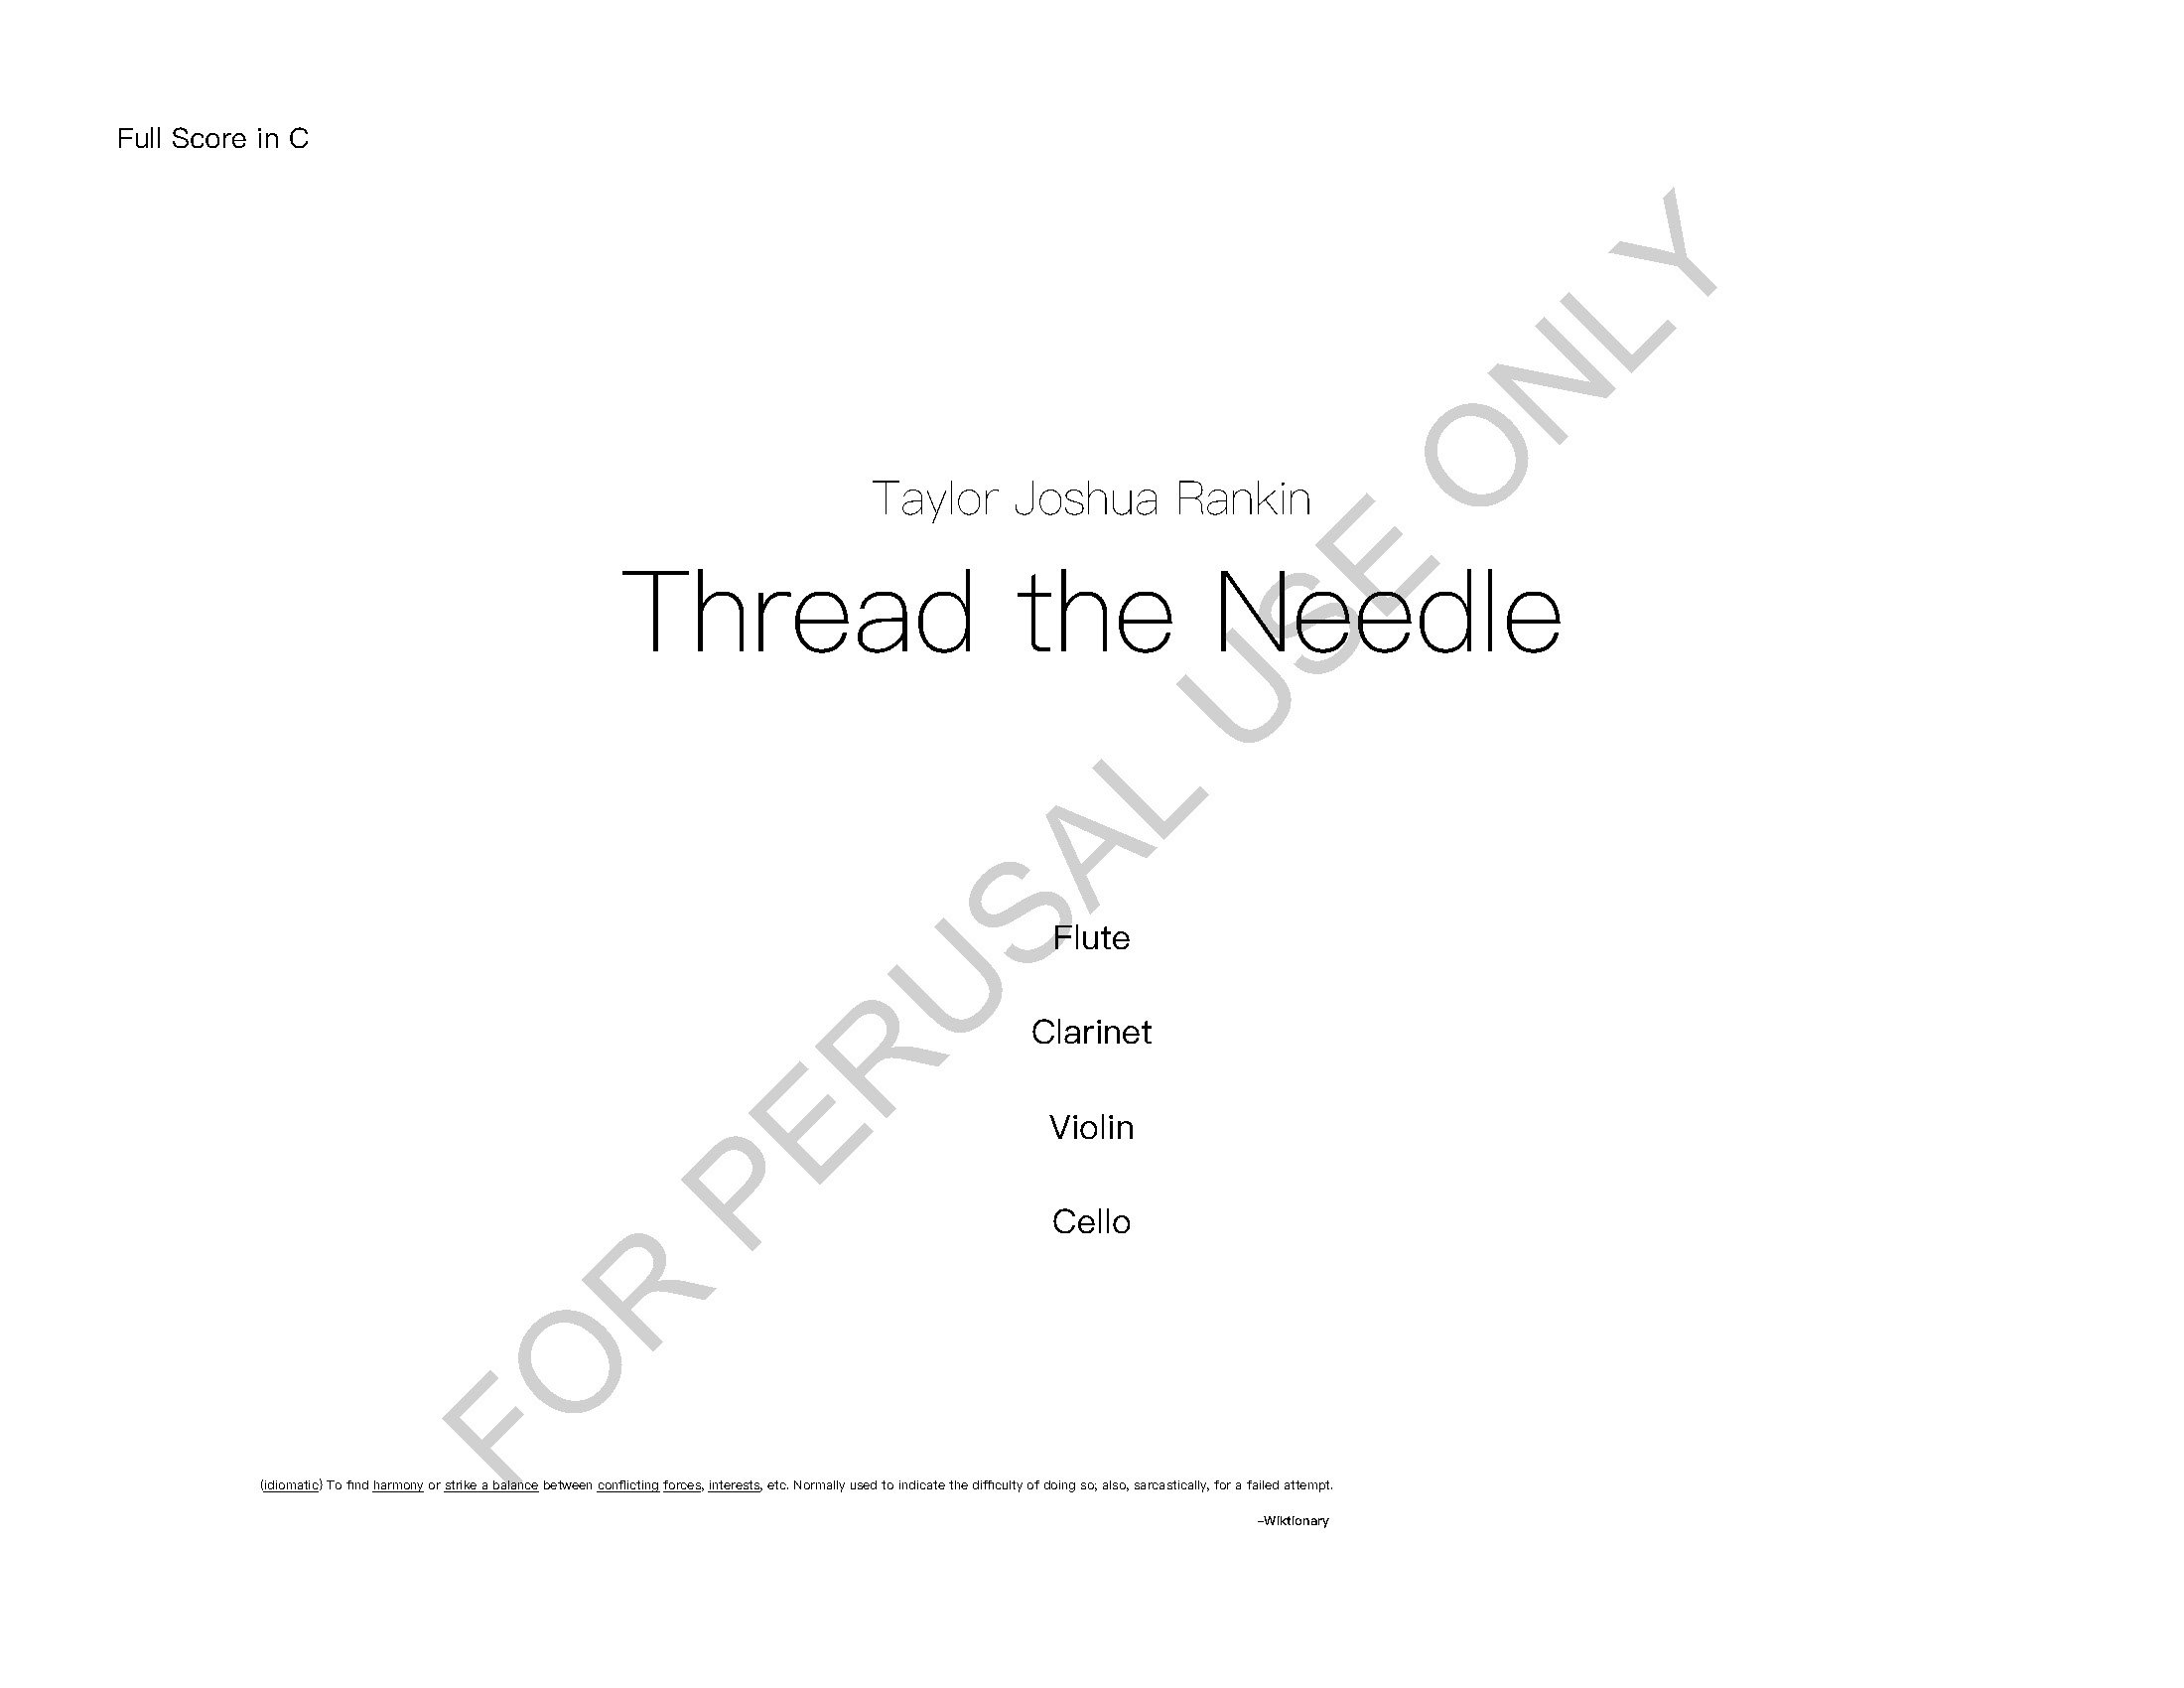 Thread the Needle - Full Score in C_Page_01.jpg